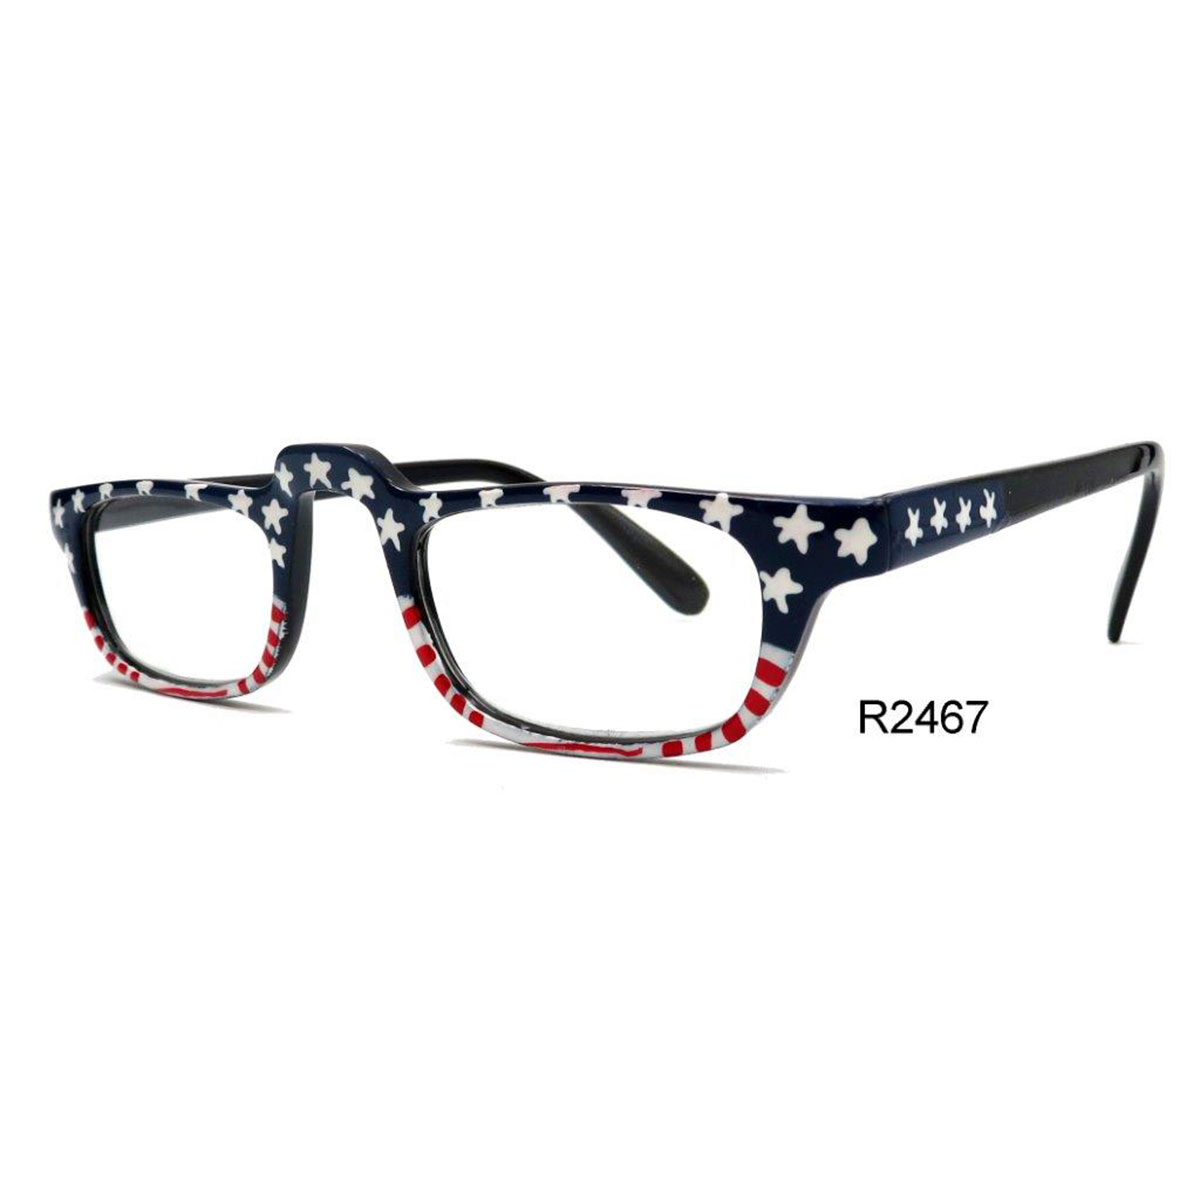 Hand Painted Reading Glasses #2467 Flag Motif 12 Pack